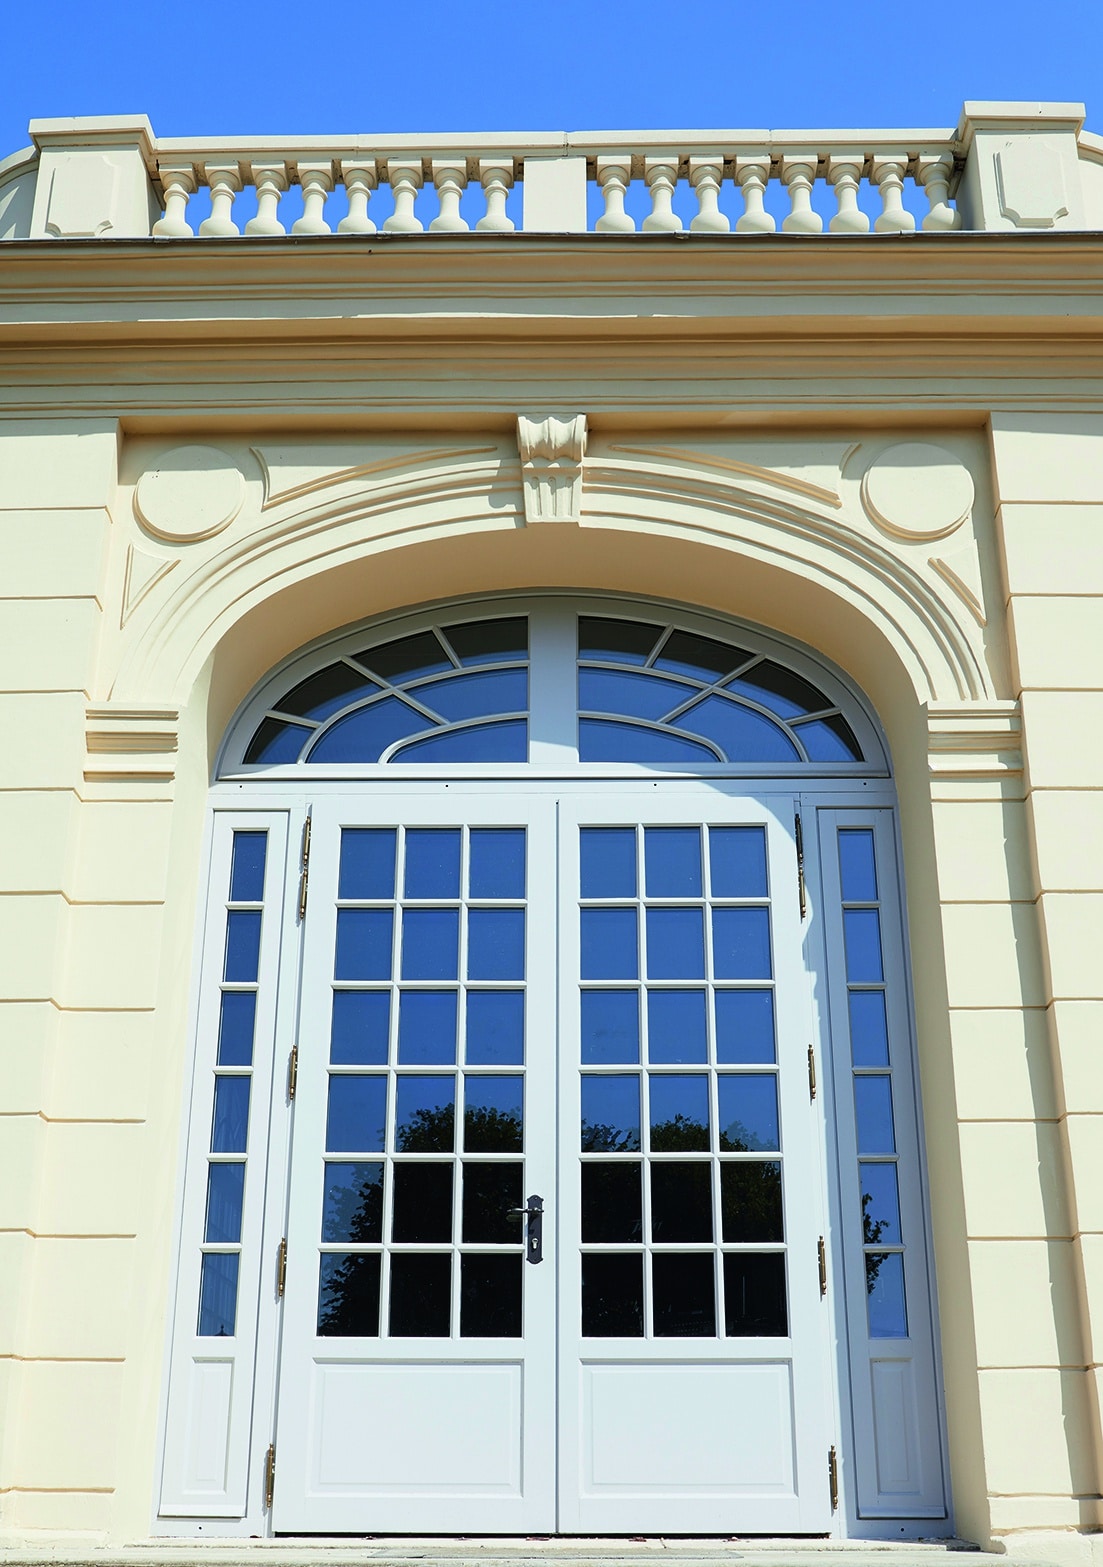 An exterior view of the wood door entry of a French mansion.